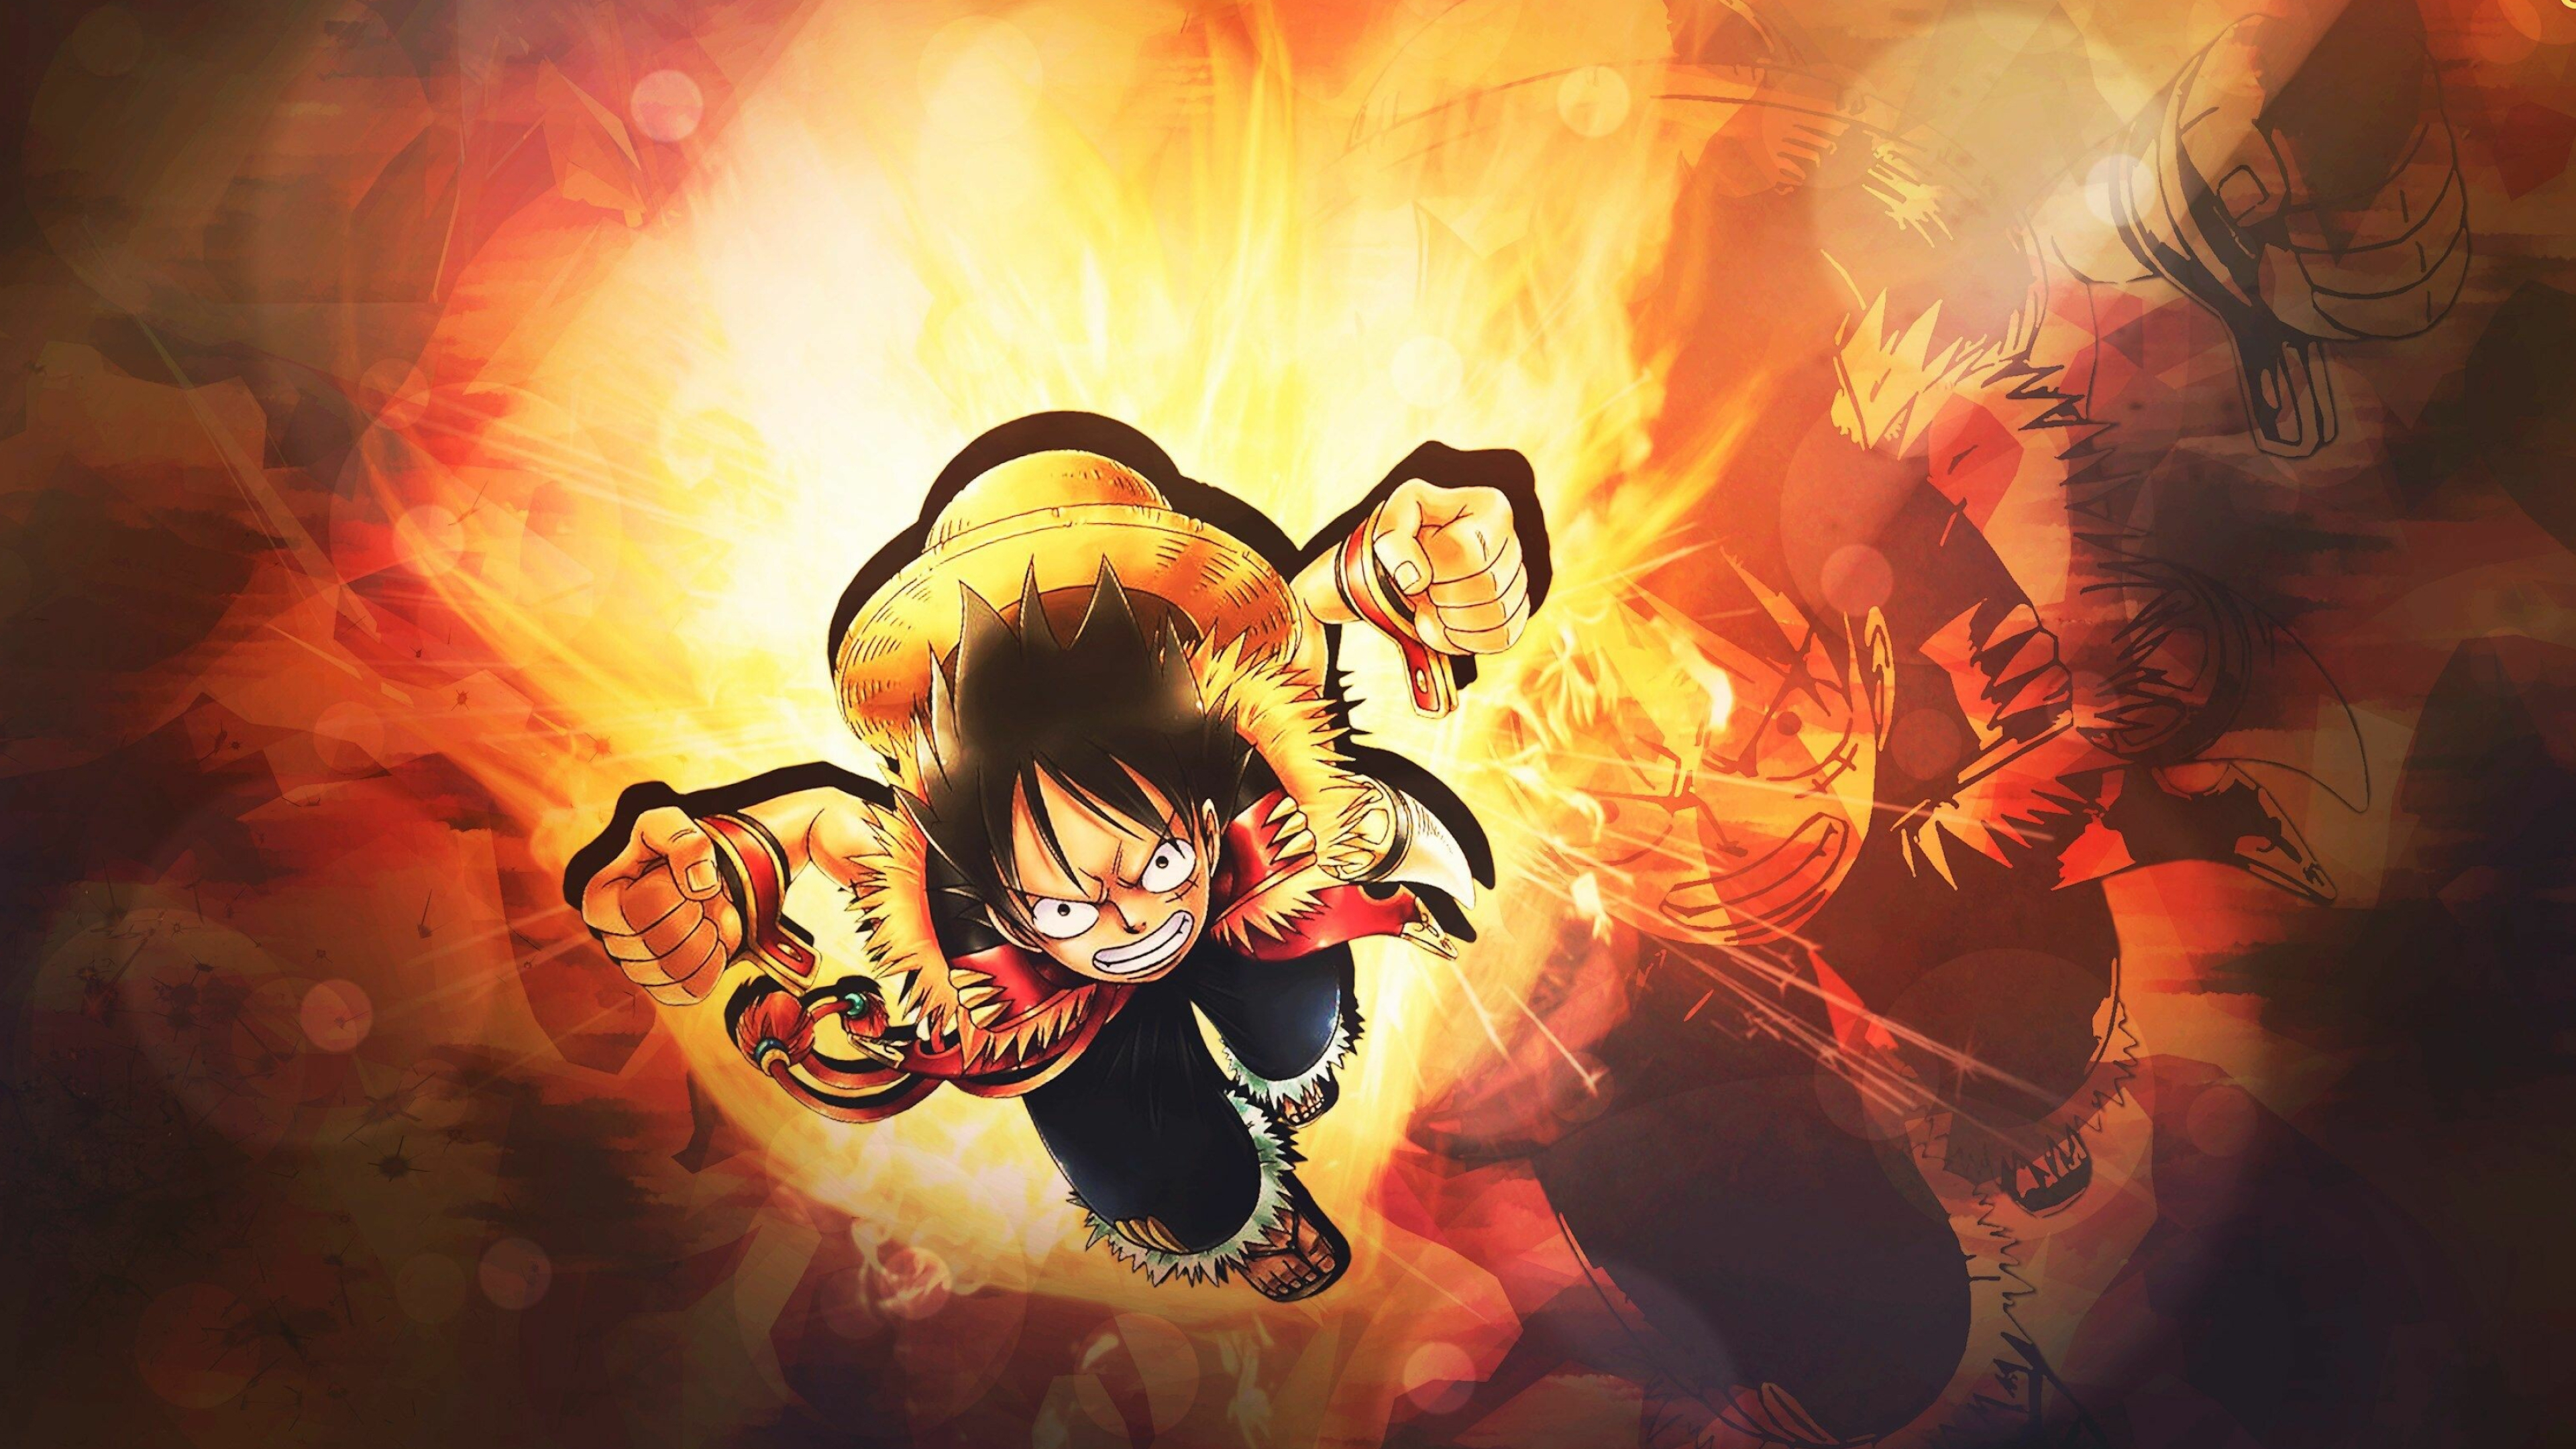 One Piece: The story follows the adventures of Monkey D. Luffy, Anime. 3840x2160 4K Background.